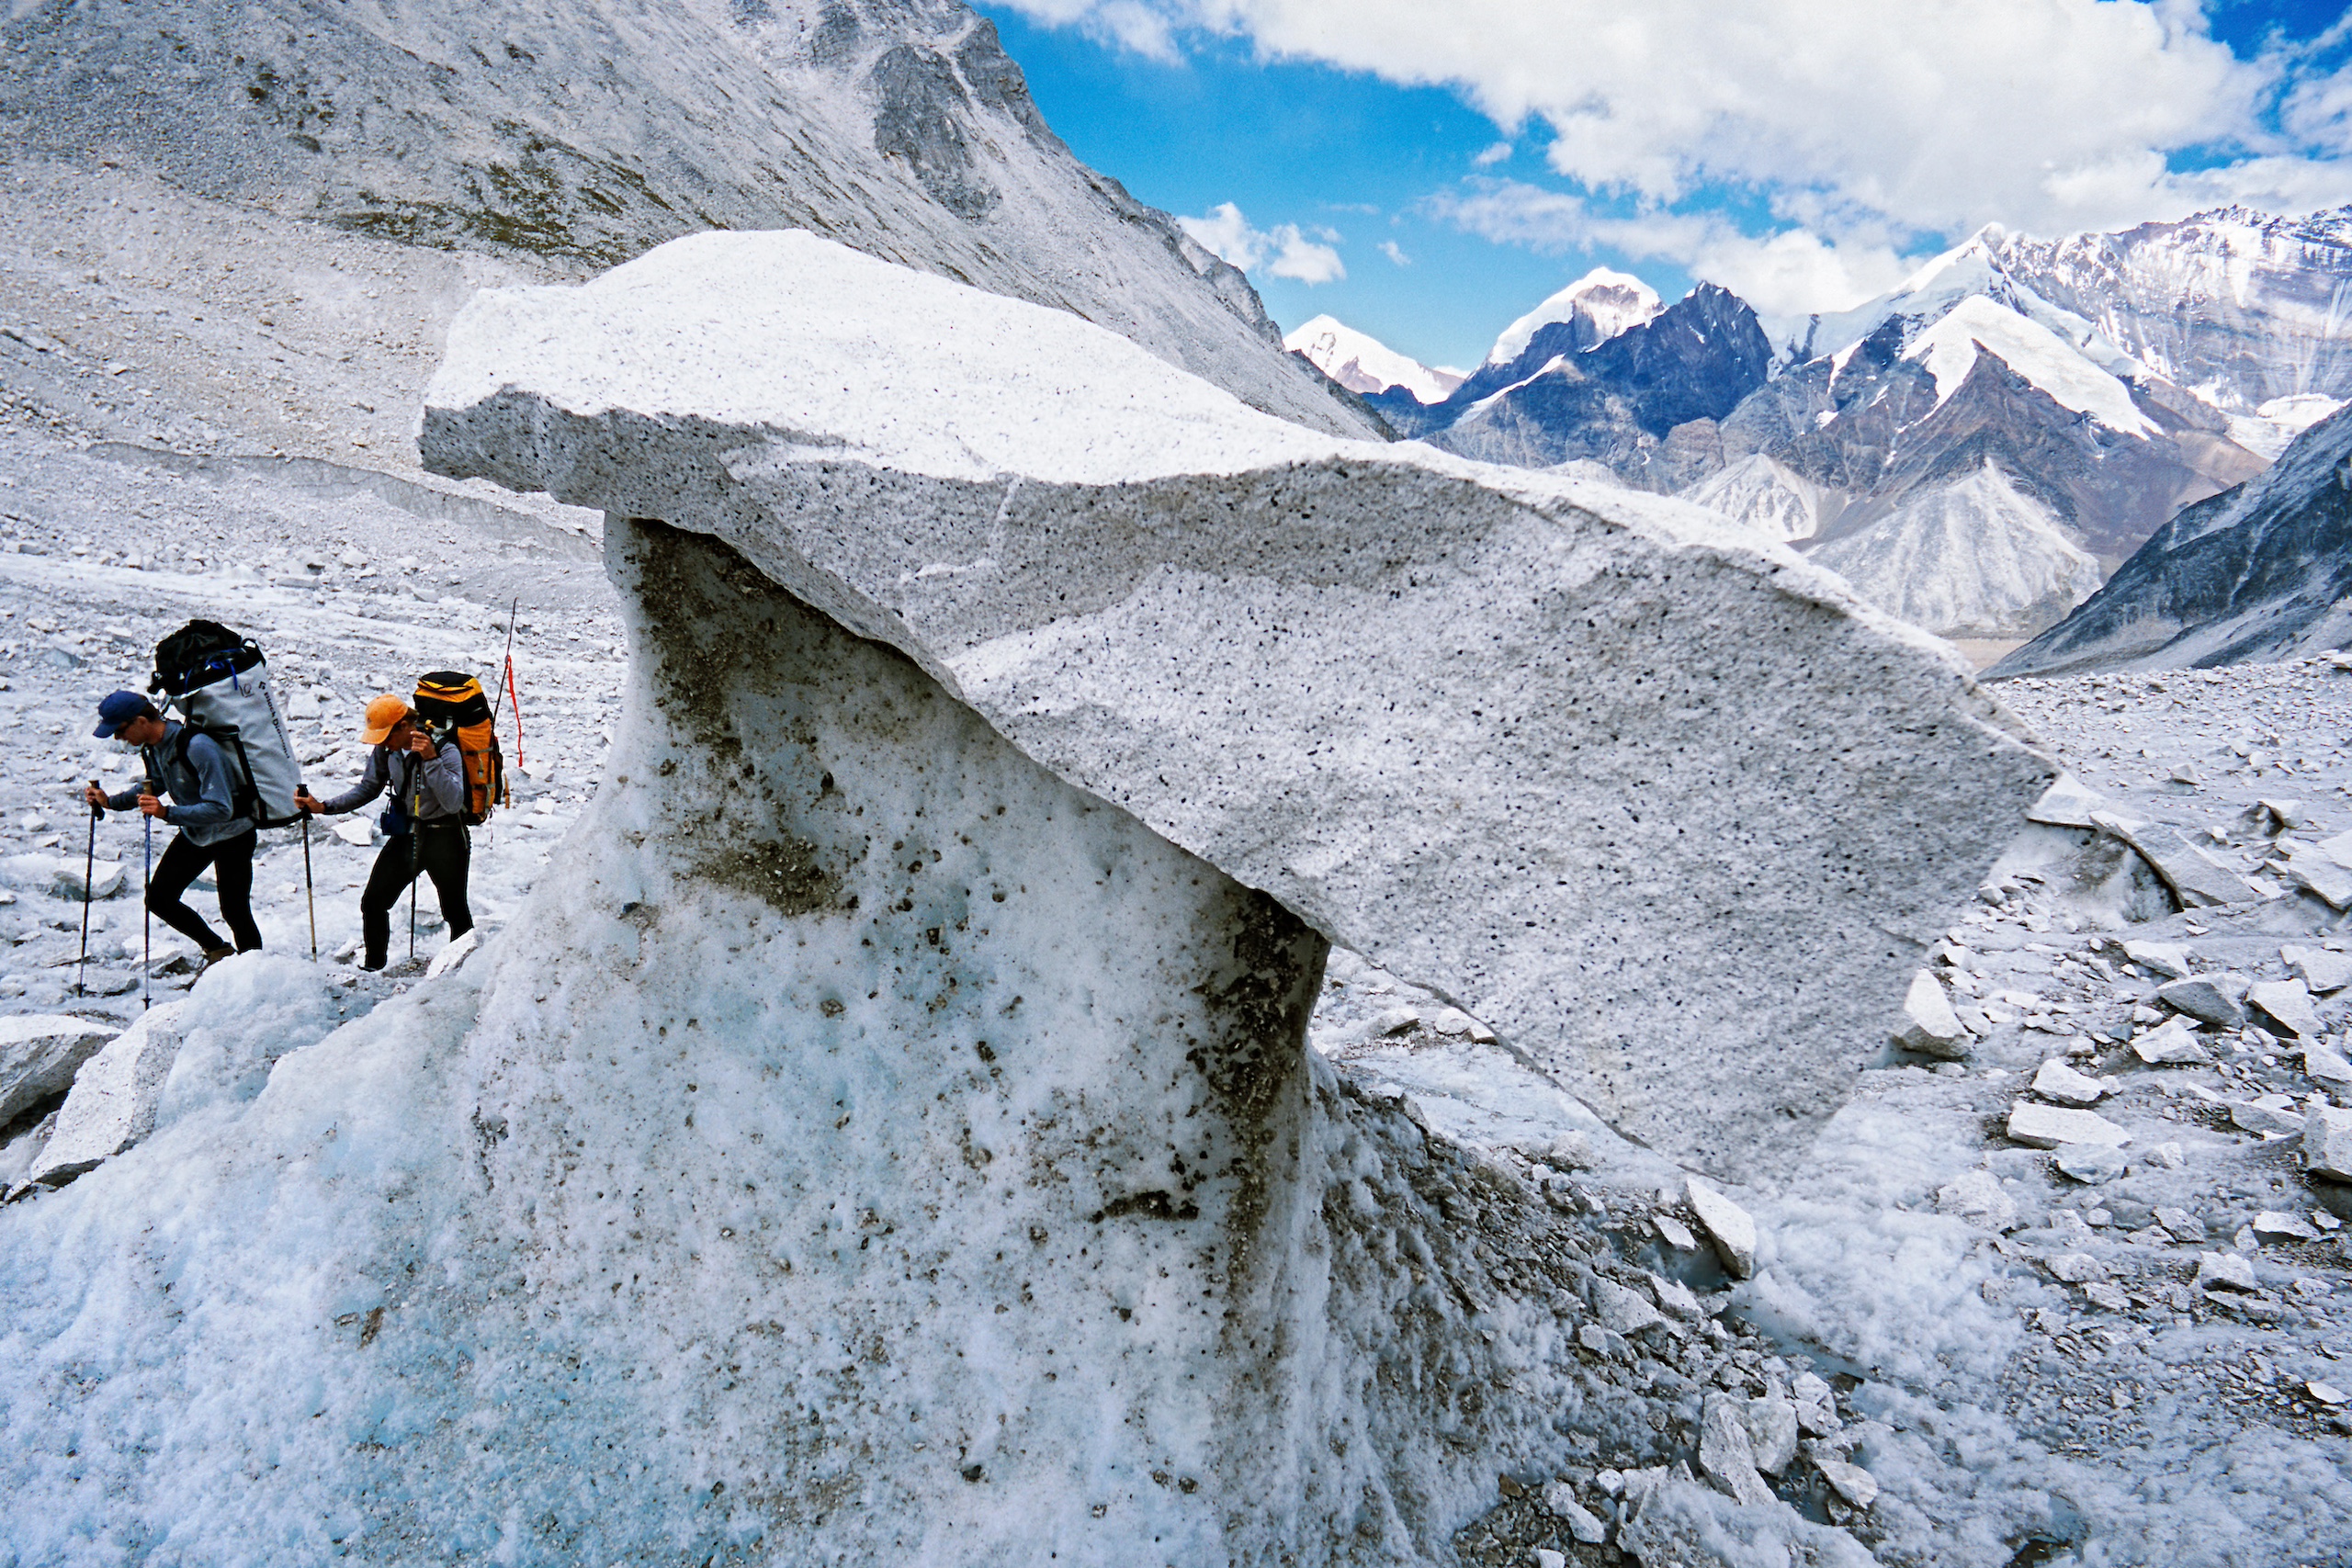 <p class="p1">Mountaineers in Garhwal, India walk past a stone table &#8211; a sign of a rapidly melting glacier. The lack of cooperation among South Asian countries to protect the frozen waters of the Himalayas leaves the region exposed and unprepared to face climate change threats. (Image: Melvin Redeker / Alamy)</p>